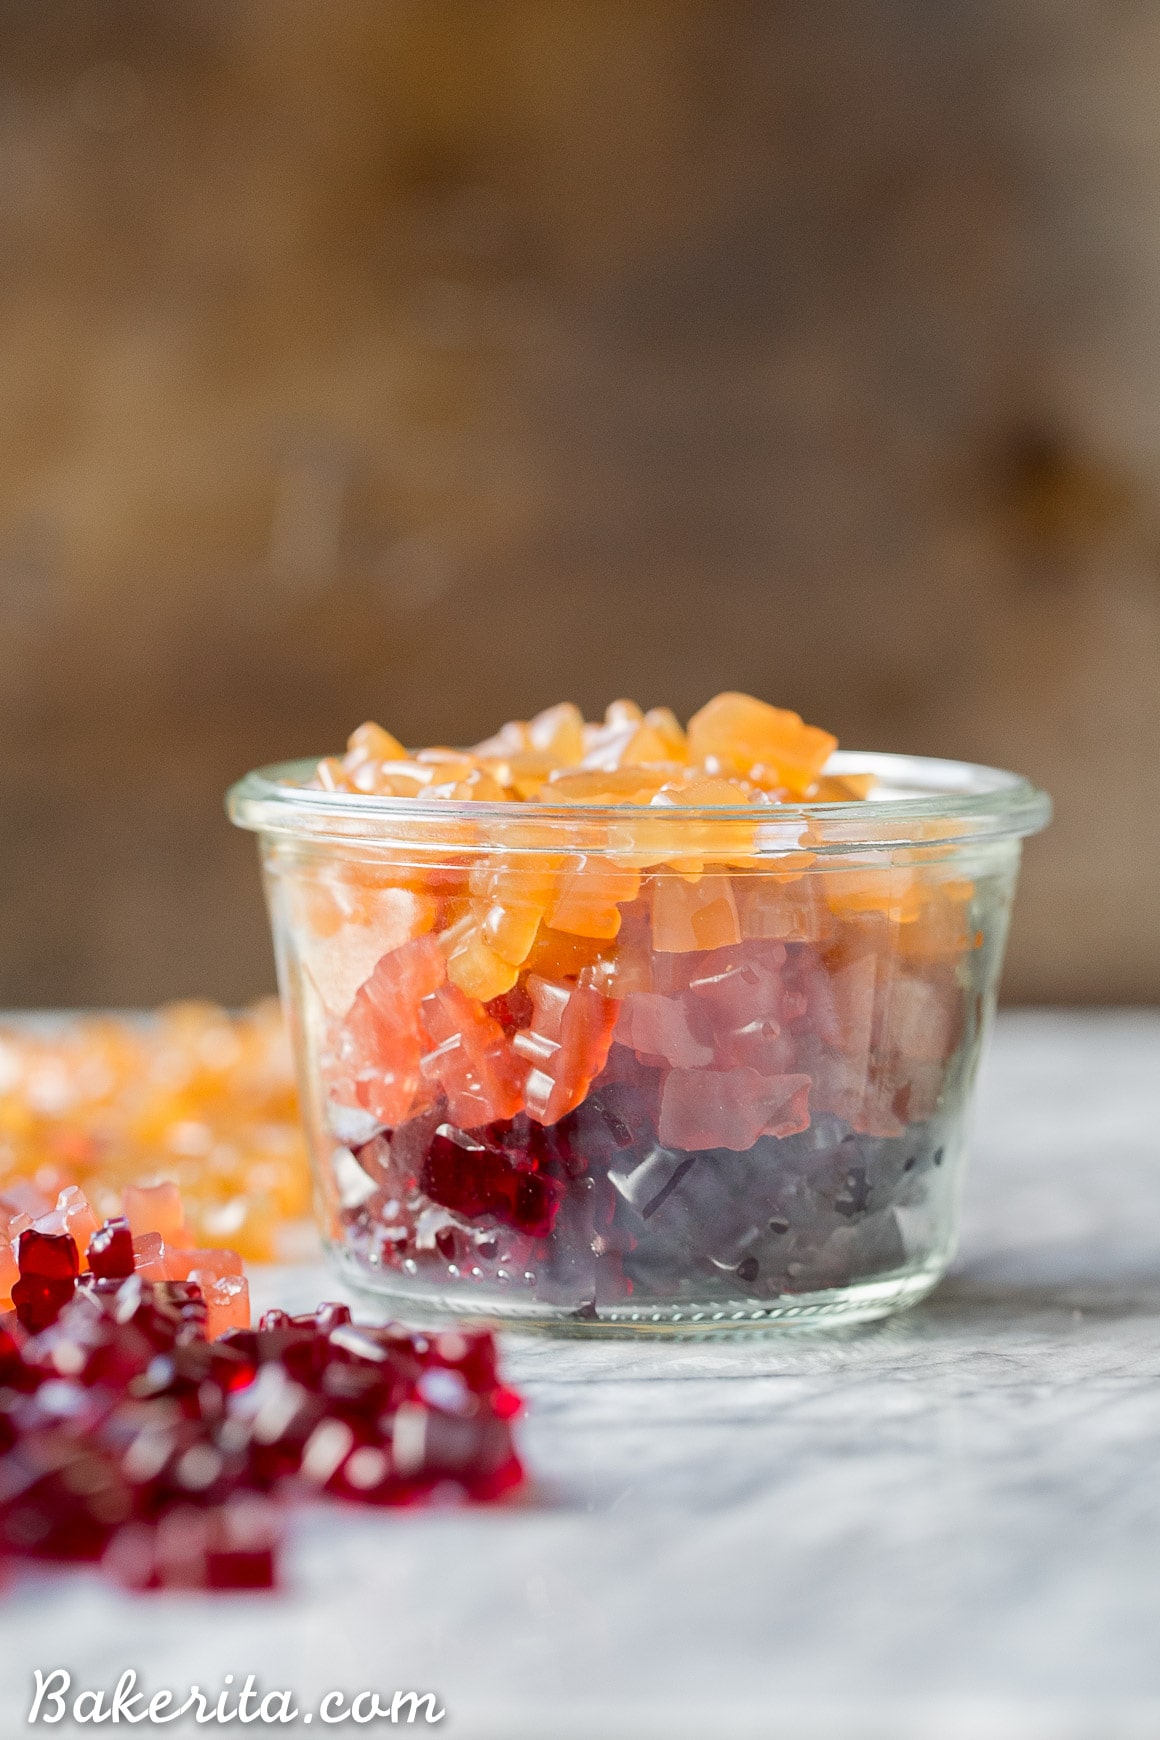 These Paleo Gummies couldn't be easier to make! The three flavors, Pomegranate, Apple Cinnamon, and Cranberry Orange, are flavored with fruit juice and made with gut-healing gelatin for a superfood boost. You can use any flavor of fruit juice you'd like to customize these to your tastes, too!